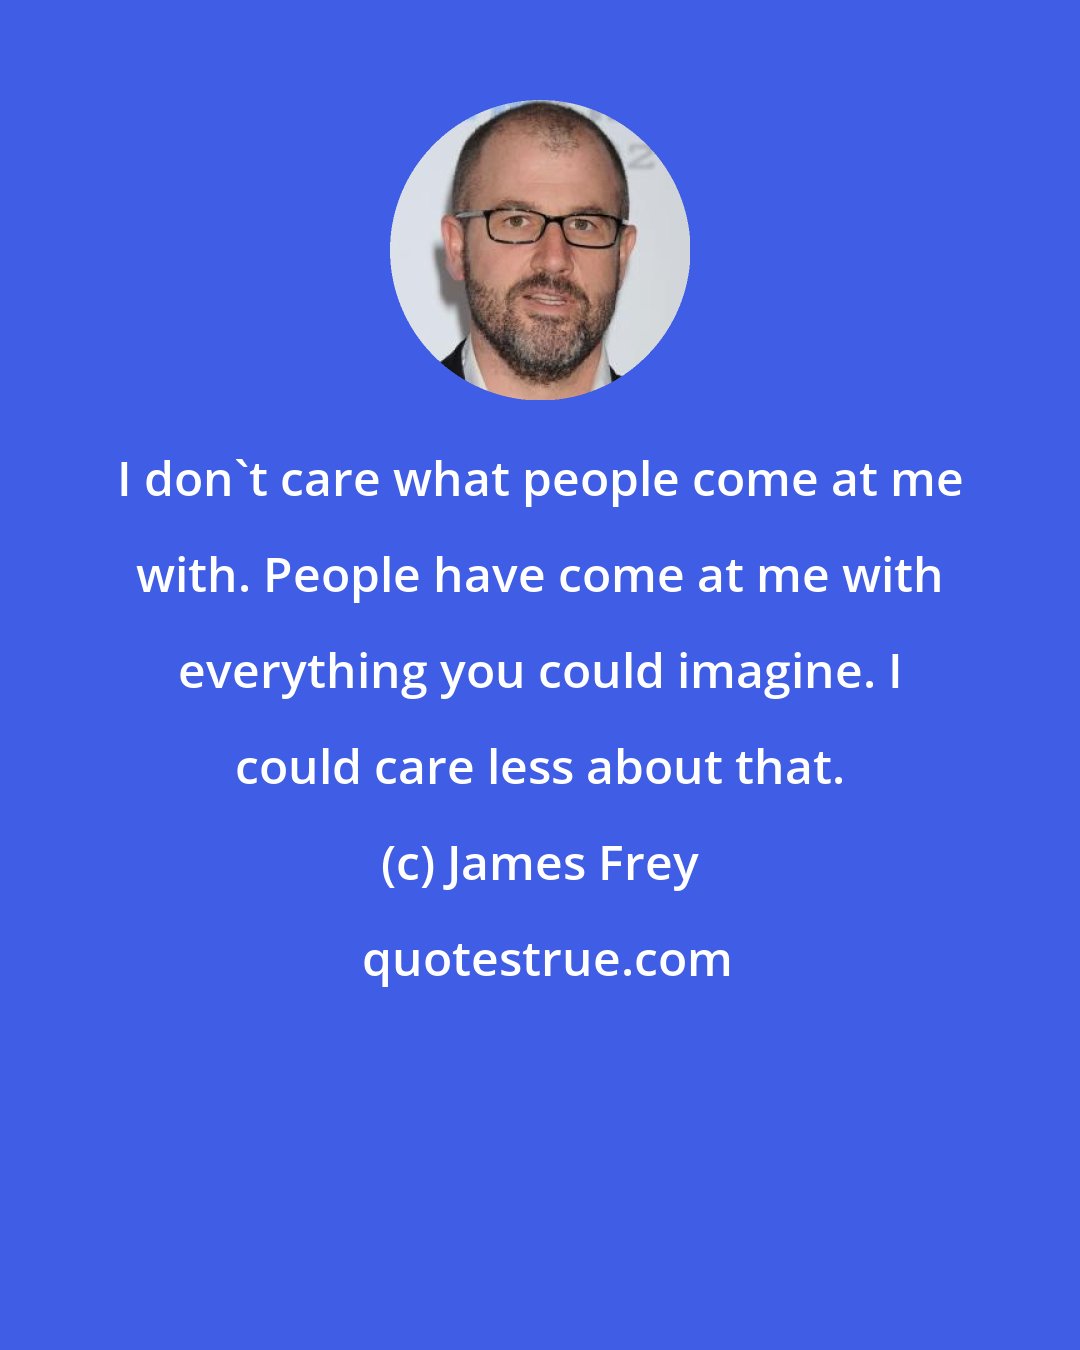 James Frey: I don't care what people come at me with. People have come at me with everything you could imagine. I could care less about that.